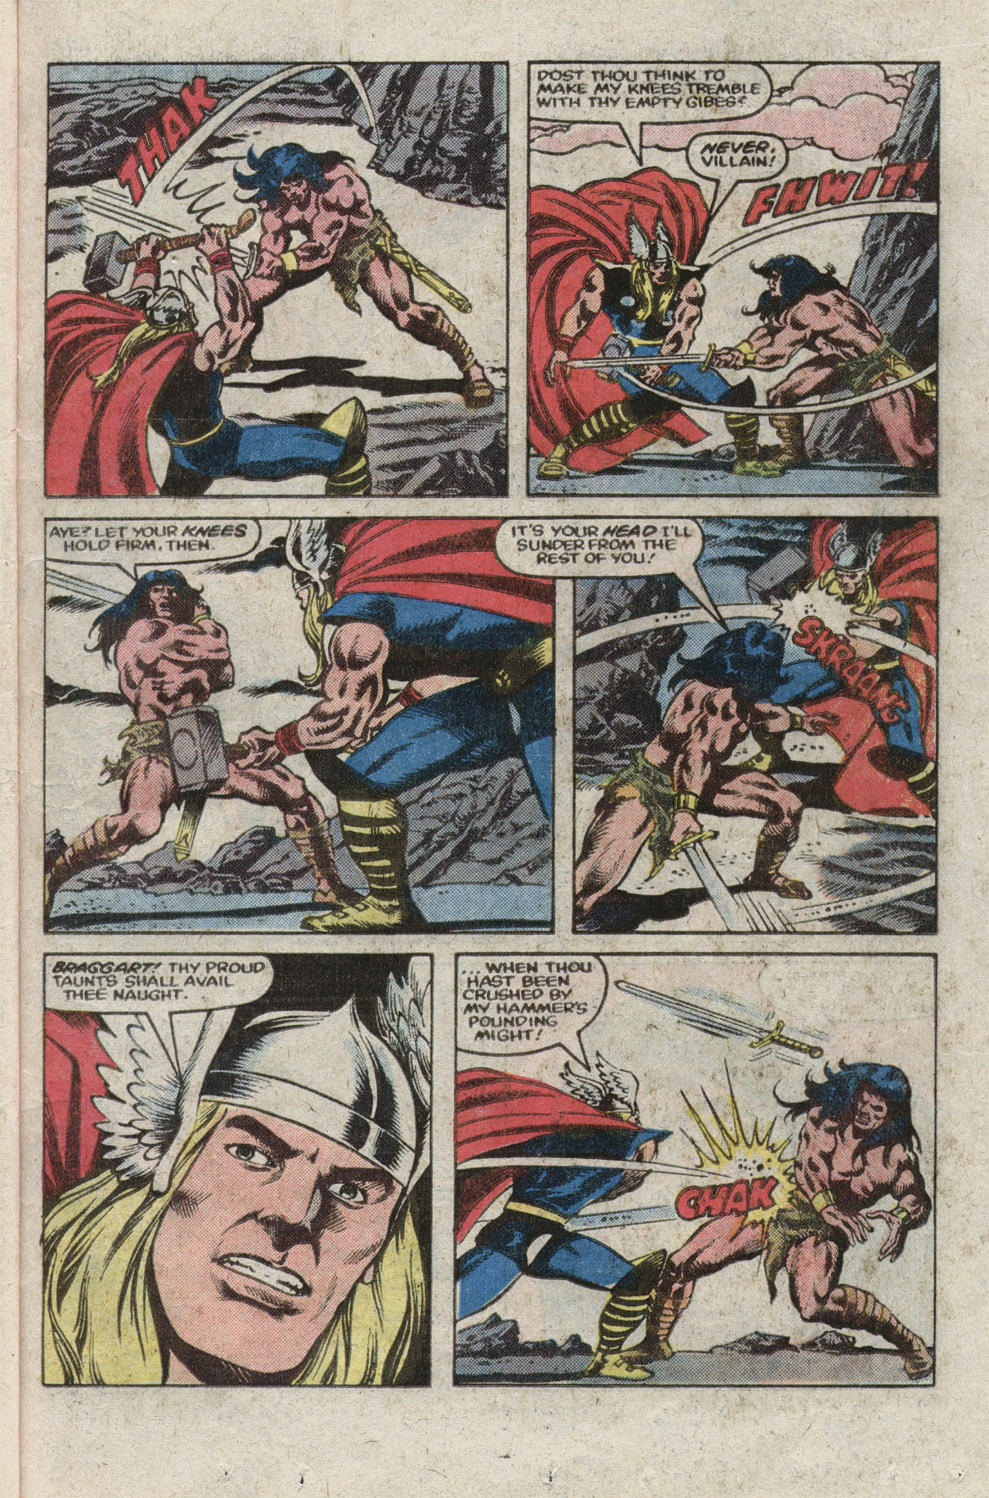 What If? (1977) issue 39 - Thor battled conan - Page 11